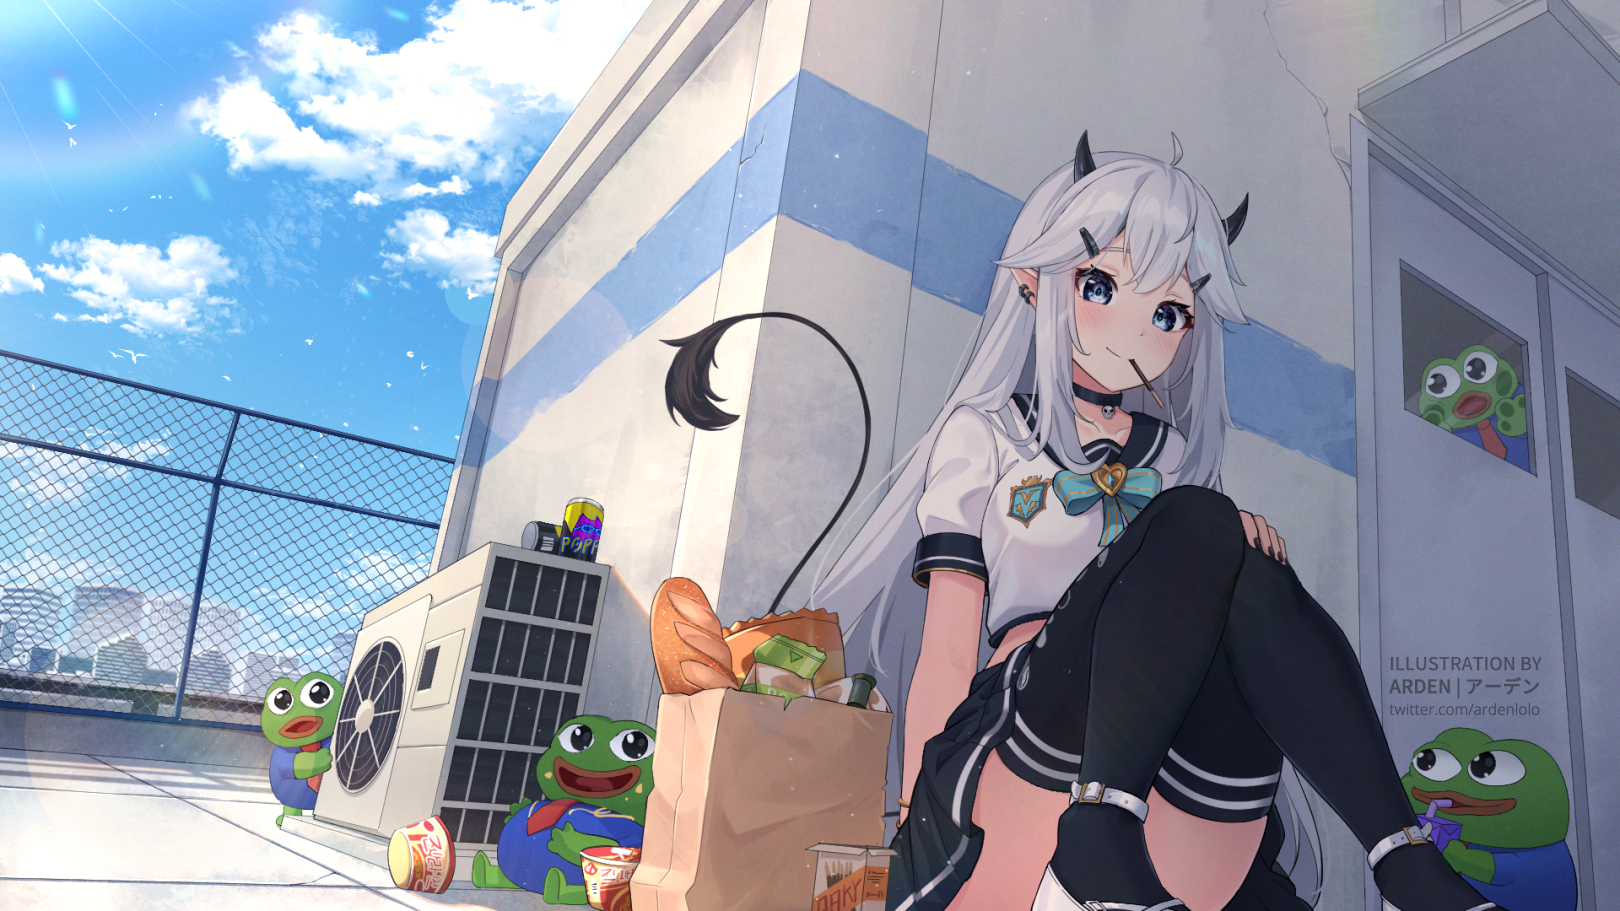 Anime 1620x911 anime anime girls Veibae pointy ears horns tail rainbows sky clouds Pepe (meme) smiling looking at viewer stockings schoolgirl school uniform bow tie fence rooftops Ardenlolo Virtual Youtuber